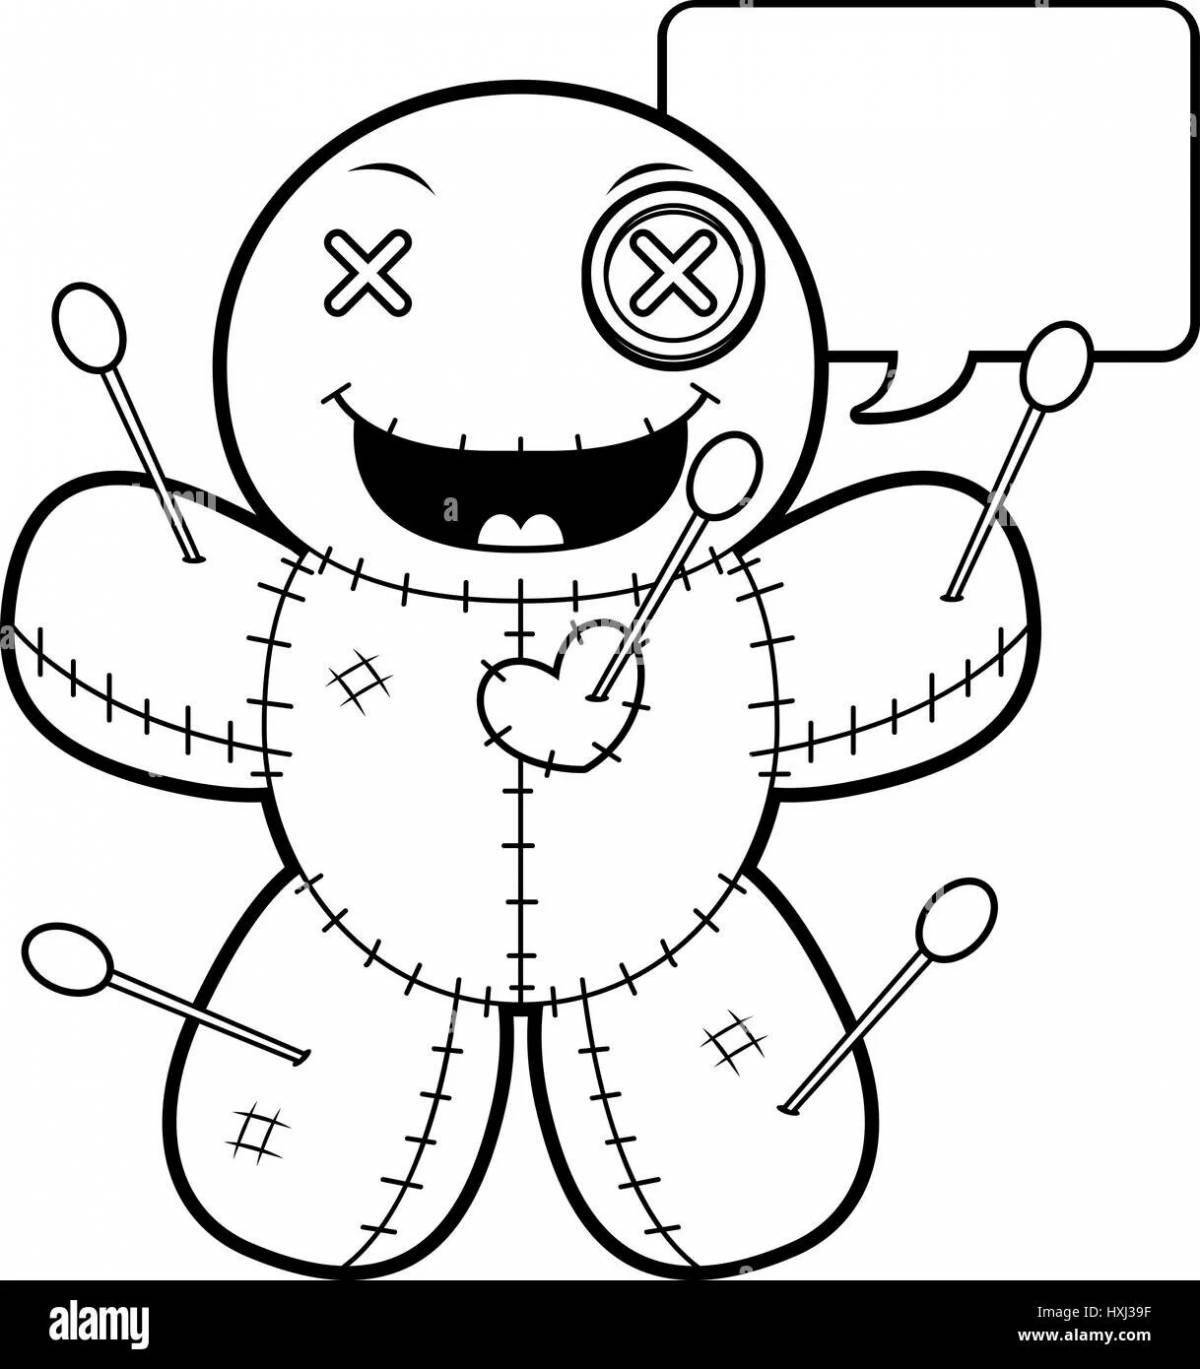 Coloring book picturesque voodoo doll